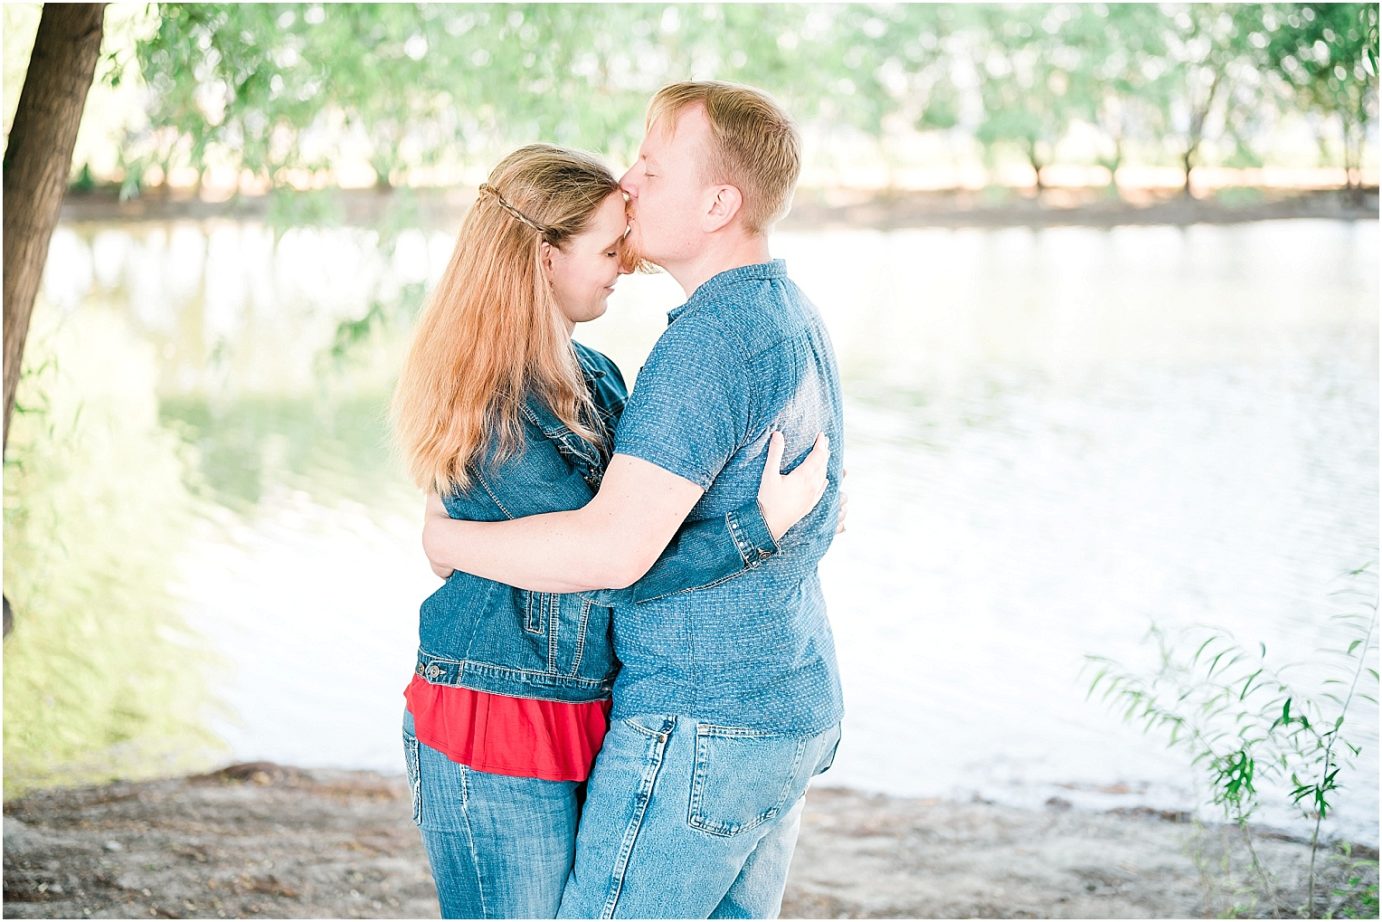 Desert engagement session Desert aire Photographer Ryan and Liz by pond